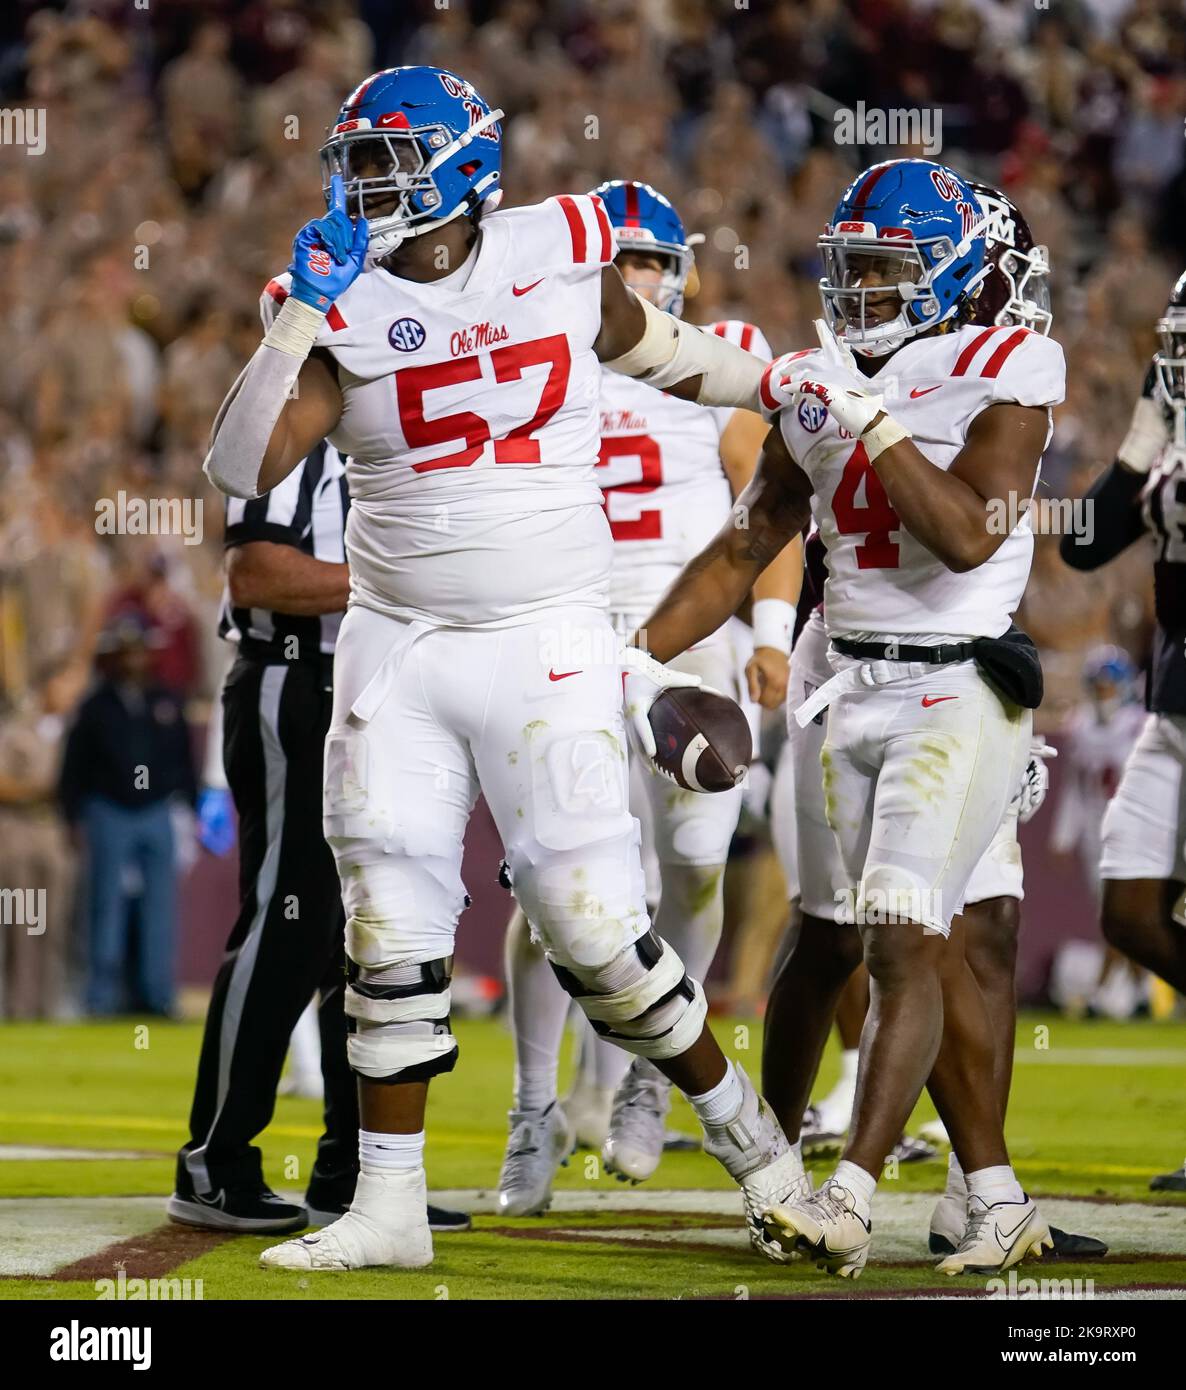 College Station, Texas, U.S.A. 29th Oct, 2022. October 29, 2022- College Station, Texas U.S.A - Ole Miss MICAH PETTUS (57) and QUINSHON JUDKINS (4) silence the crowd after scoring a touchdown during the game between the Ole Miss Rebels and the Texas A&M Aggies at Kyle Field in College Station, Texas. (Credit Image: © Jerome Hicks/ZUMA Press Wire) Credit: ZUMA Press, Inc./Alamy Live News Stock Photo